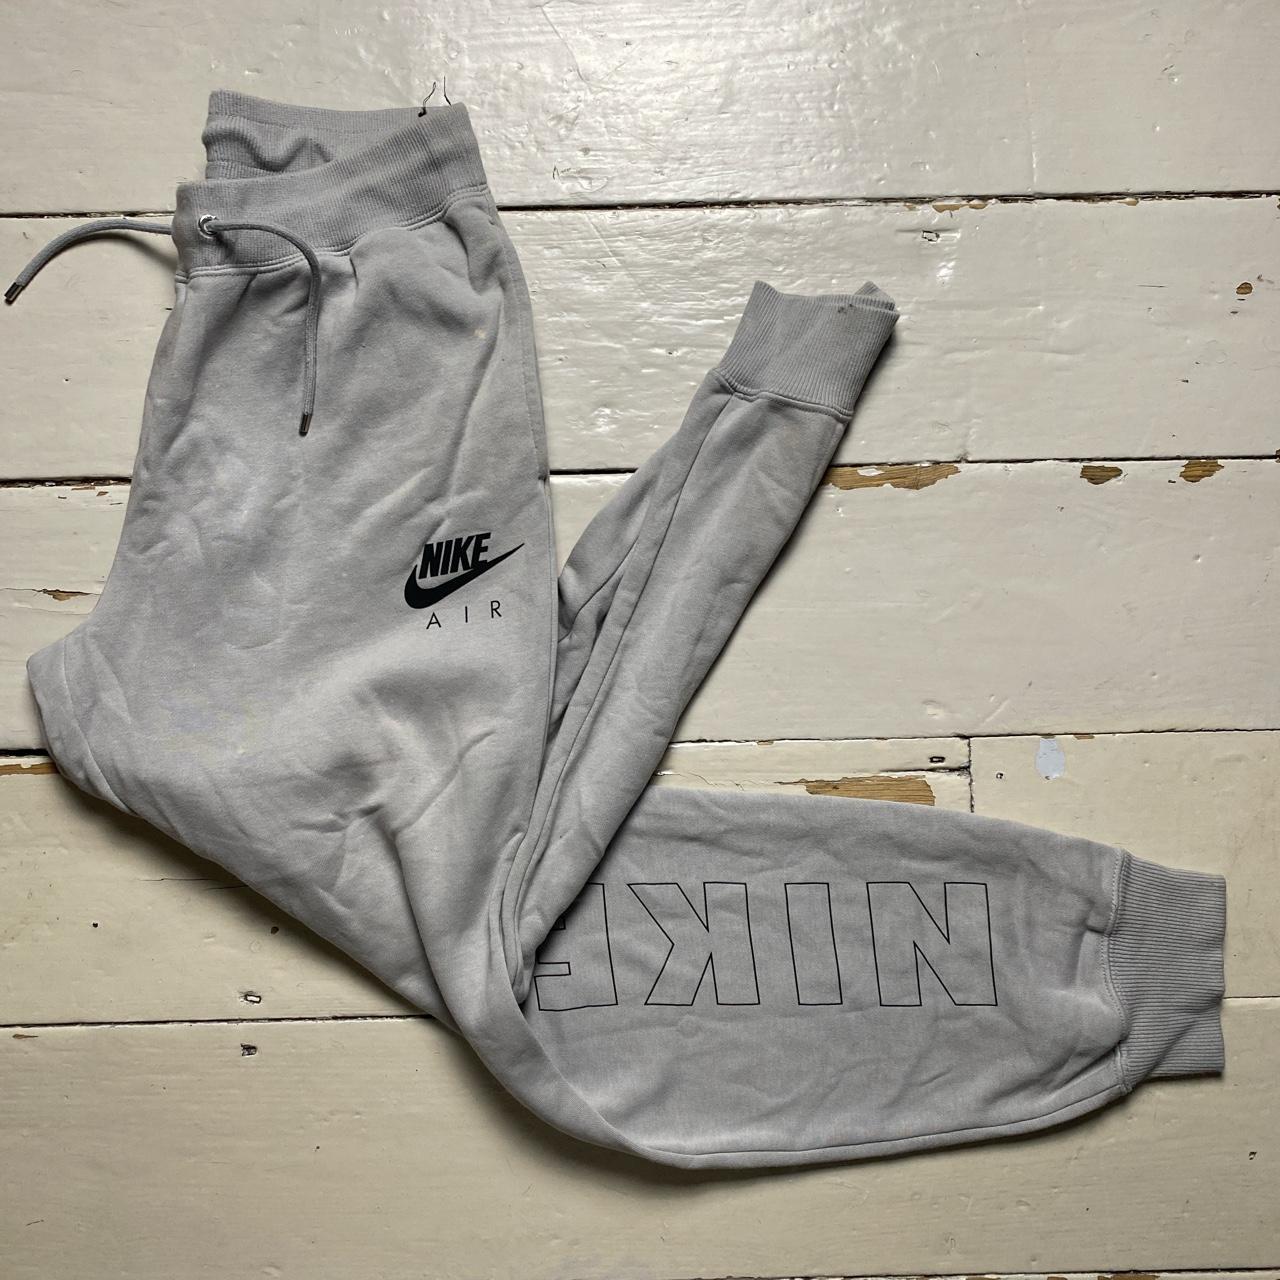 Nike Swoosh Spellout Bottoms Grey